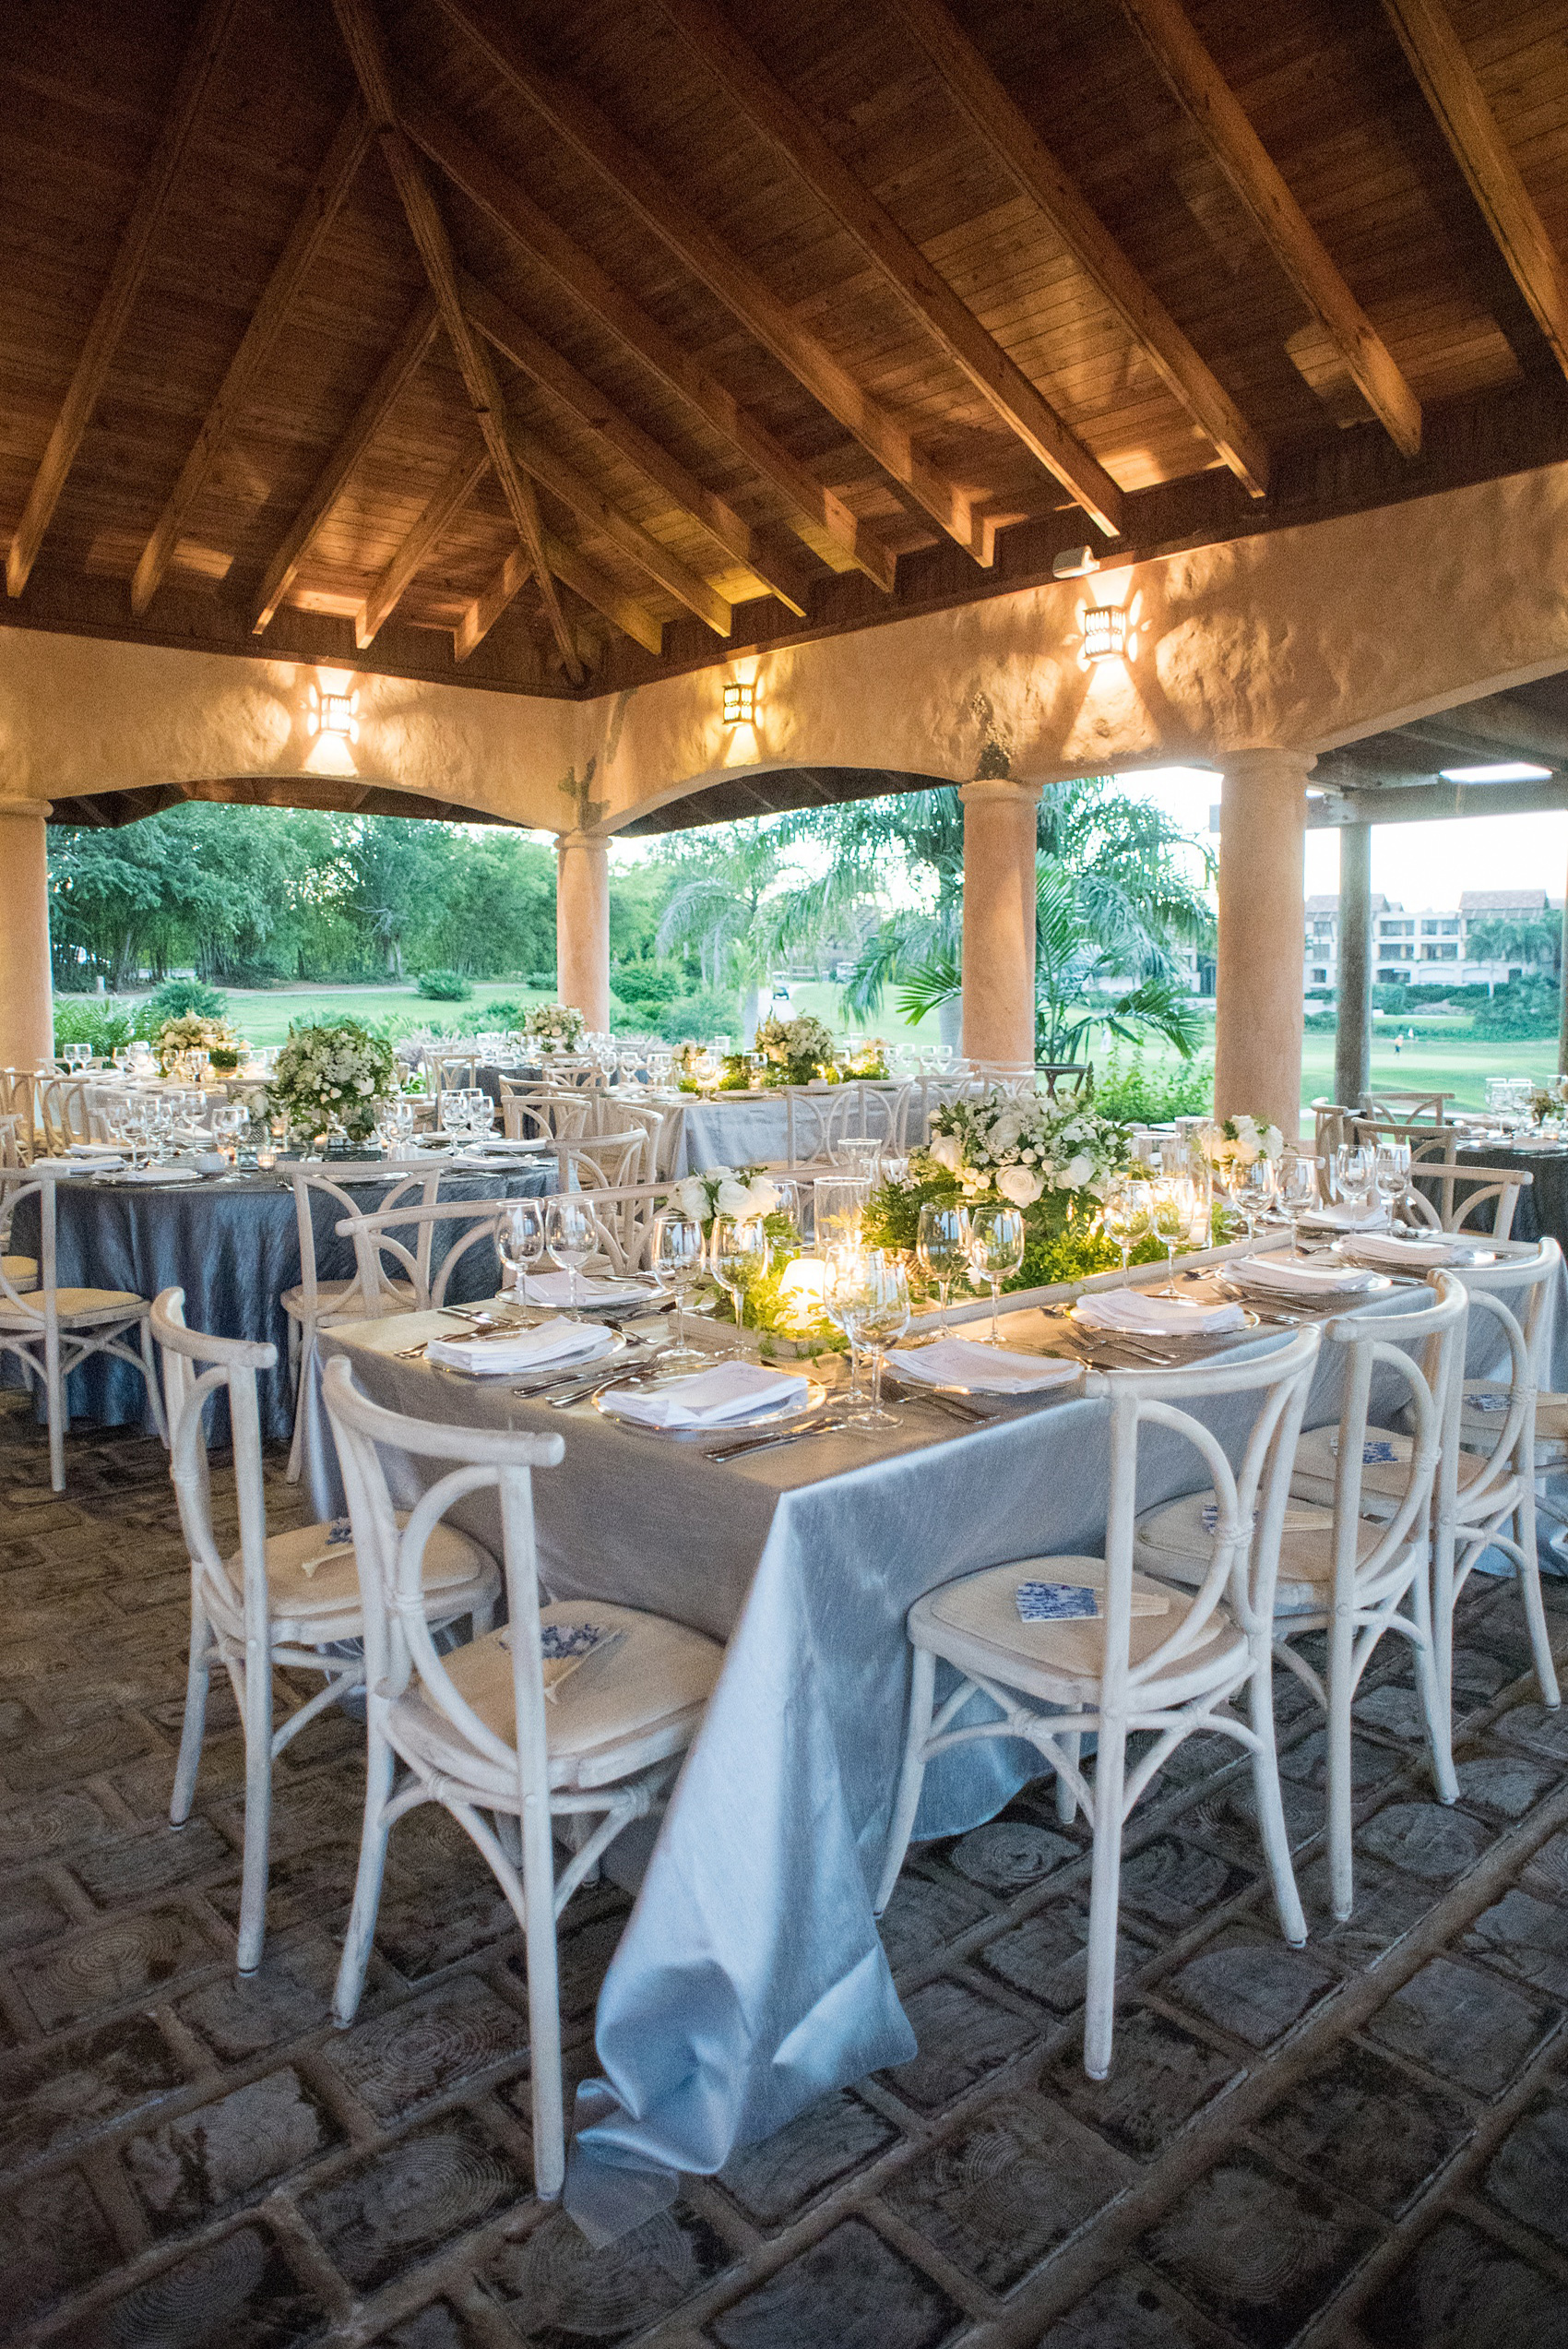 Casa de Campo in the Dominican Republic is a great location for a destination wedding. It’s in La Romana, an hour from Punta Cana, and is an all inclusive resort with Minitas beach and mountains view. It’s a beautiful venue, evidenced by these pictures by destination wedding photographer, Mikkel Paige Photography. Click through for more blue + white ceremony and reception ideas! Planning by @theeventeur. #mikkelpaige #bluewedding #dominicanrepublicwedidng #destinationweddingphotographer